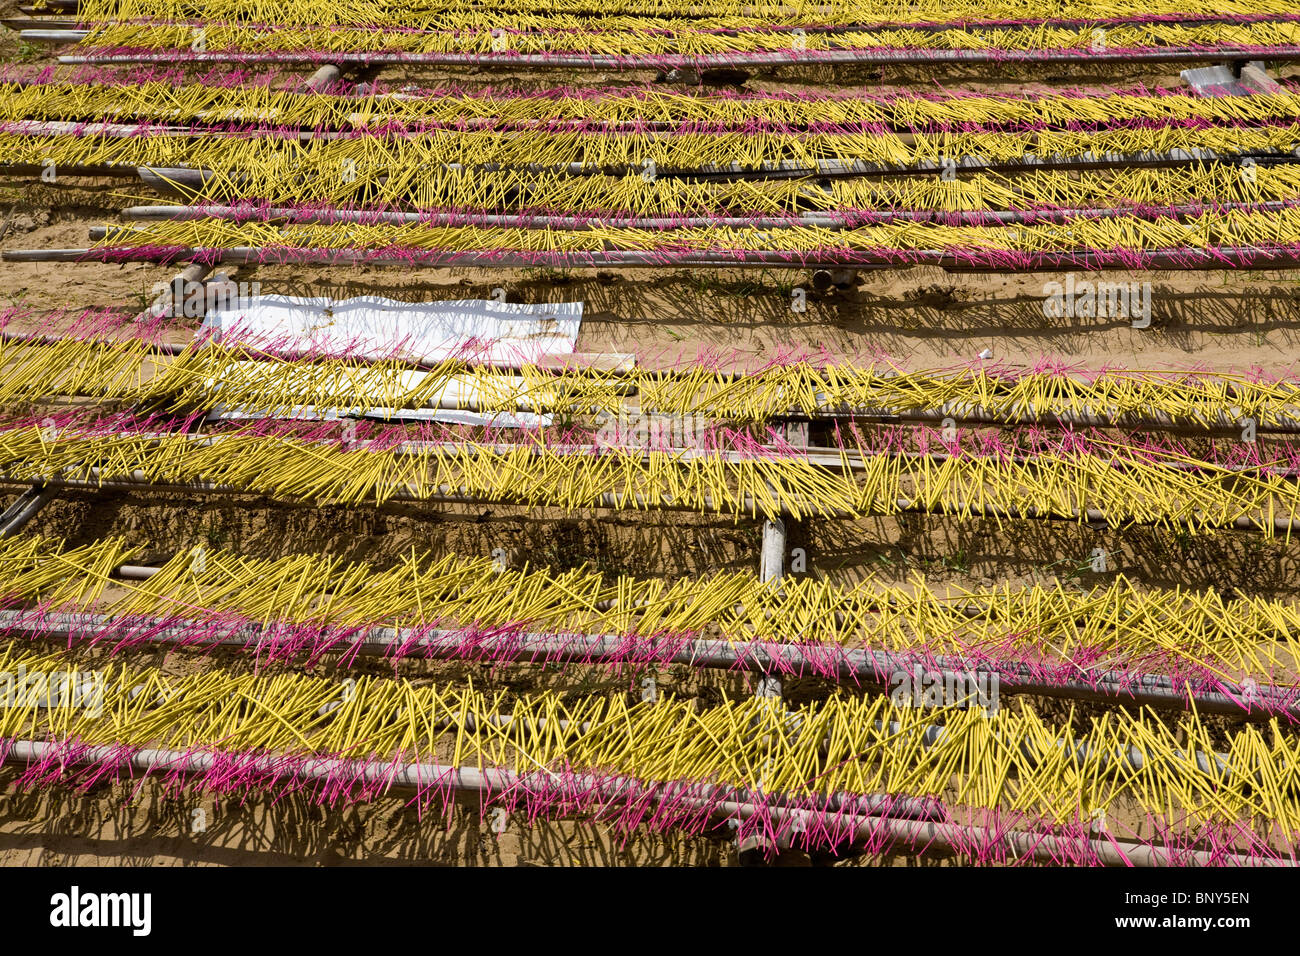 Artisanal production of incense, incense sticks drying near the side of the road, Vietnam Stock Photo